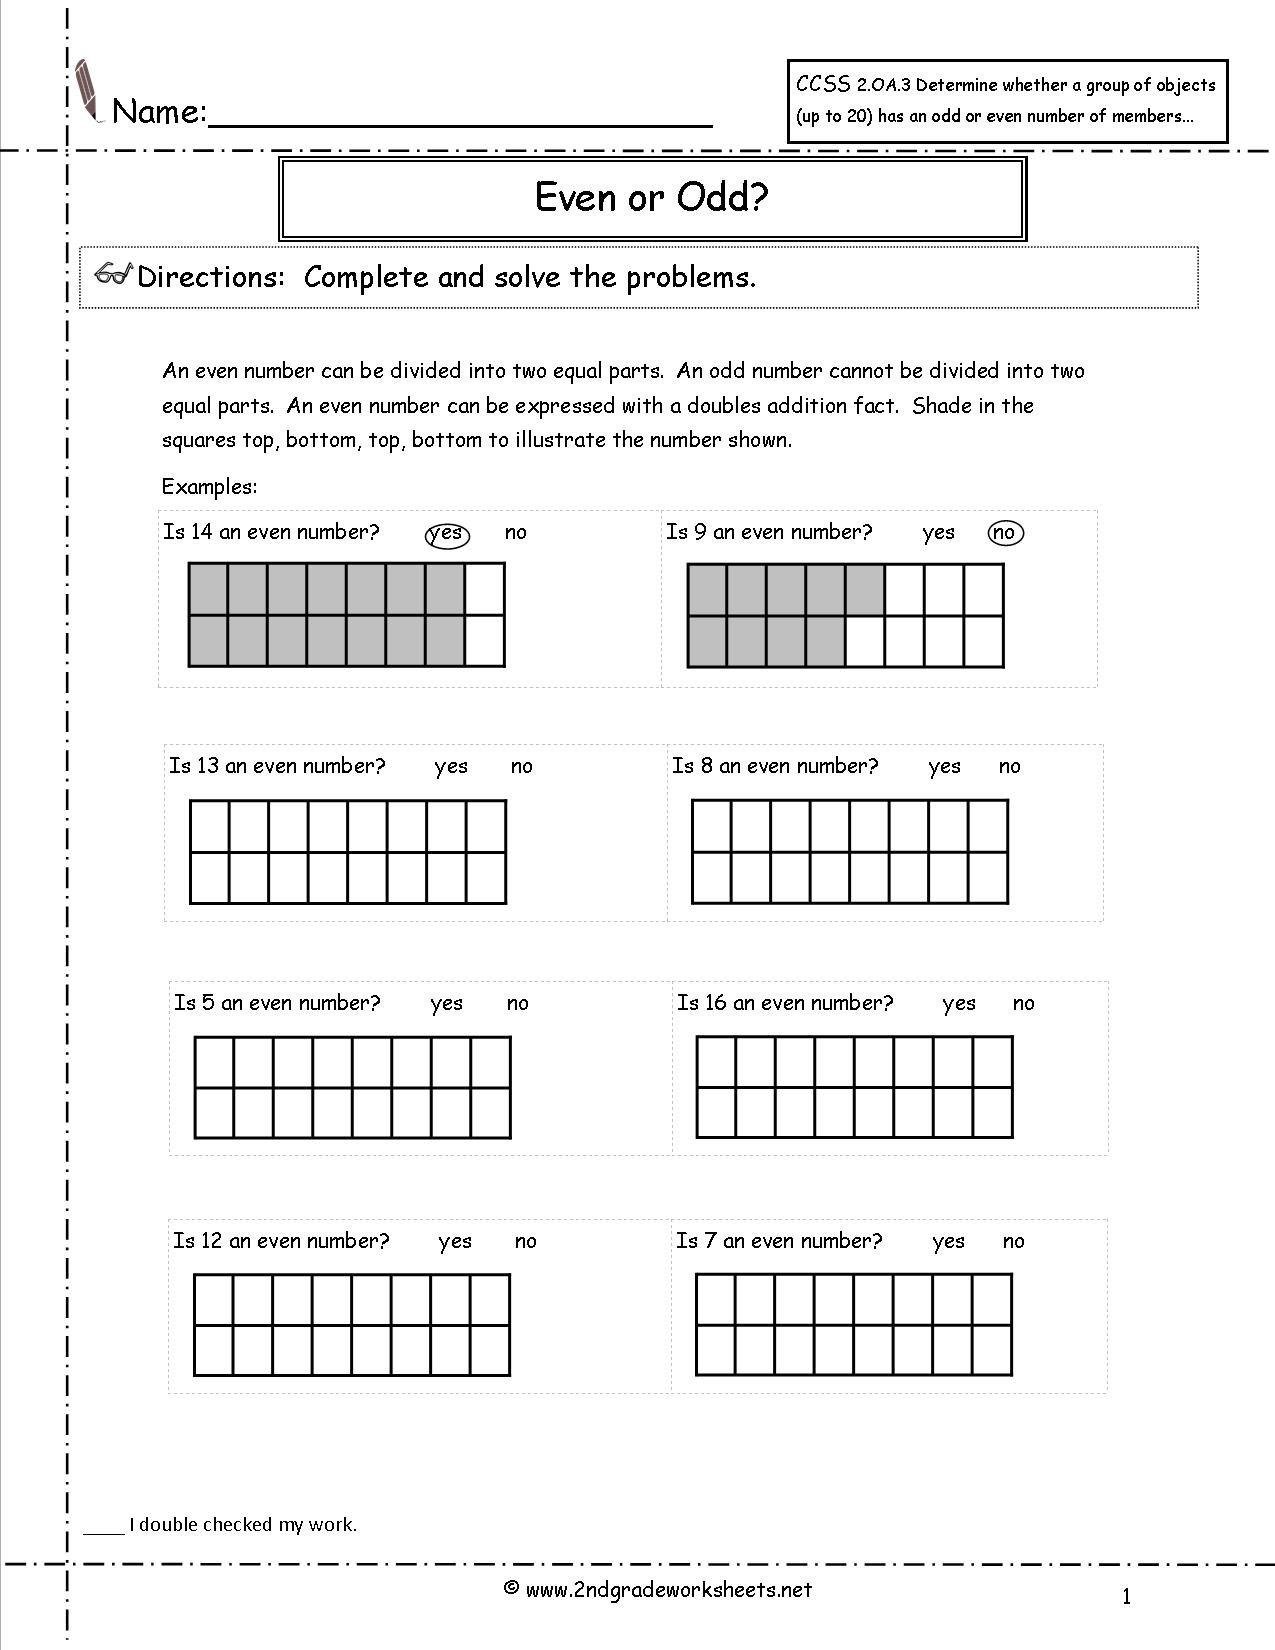 2Nd Grade Math Common Core State Standards Worksheets Along With Tape Diagram Worksheets 2Nd Grade